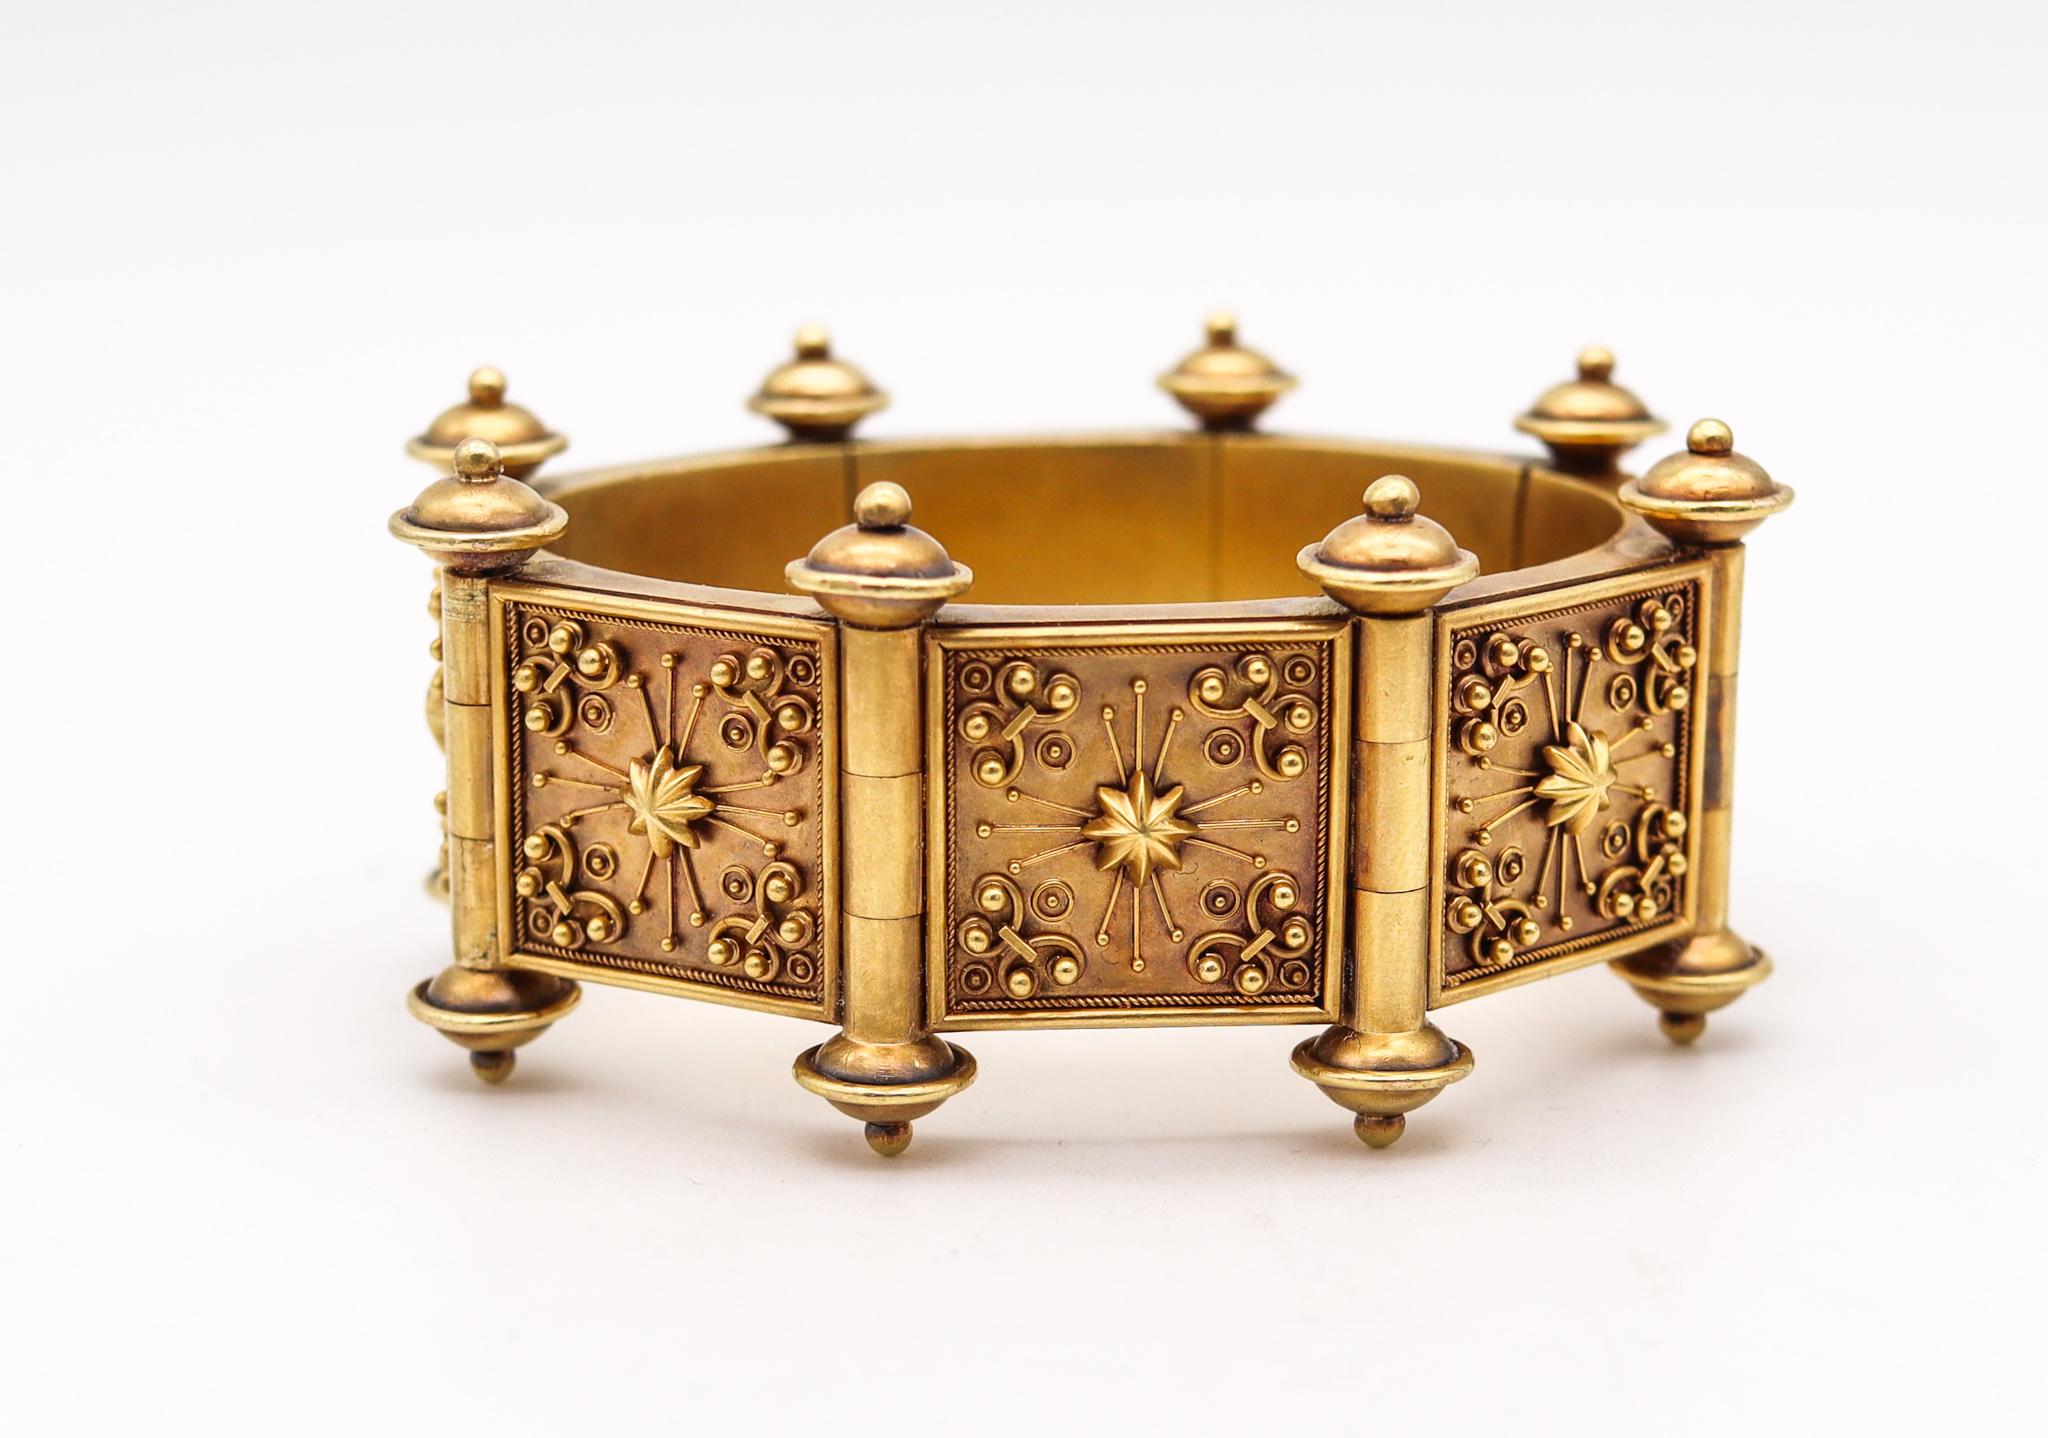 Castellani 1870 Italian Etruscan Revival Bangle Bracelet in 19Kt Yellow Gold In Excellent Condition For Sale In Miami, FL